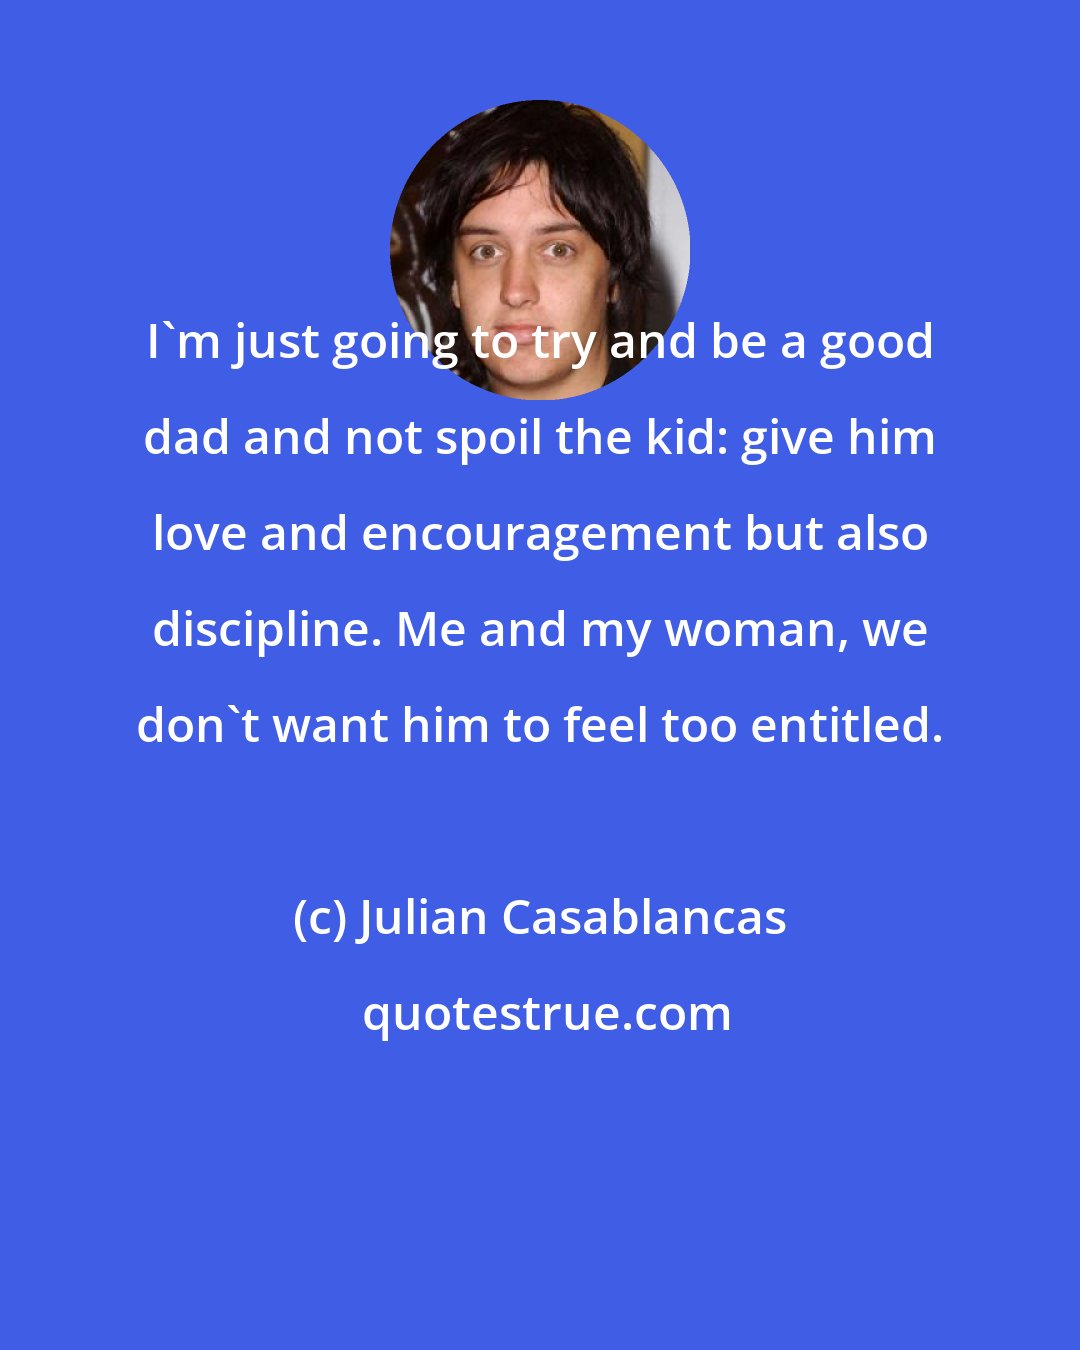 Julian Casablancas: I'm just going to try and be a good dad and not spoil the kid: give him love and encouragement but also discipline. Me and my woman, we don't want him to feel too entitled.